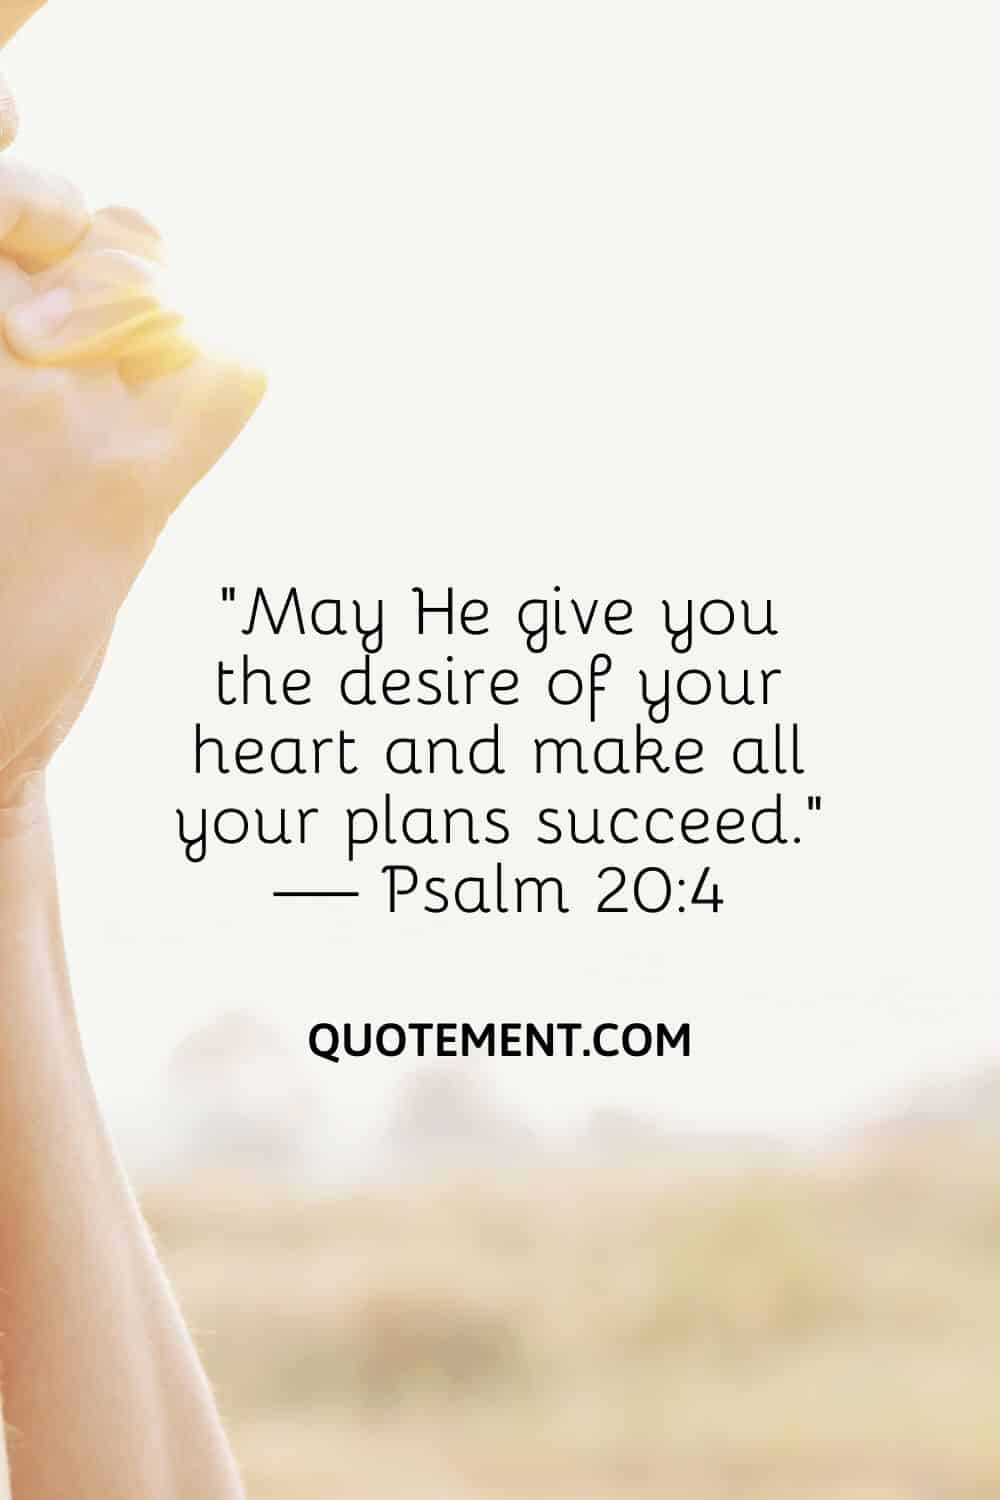 May He Give You The Desire Of Your Heart And Make All Your Plans Succeed. — Psalm 204 